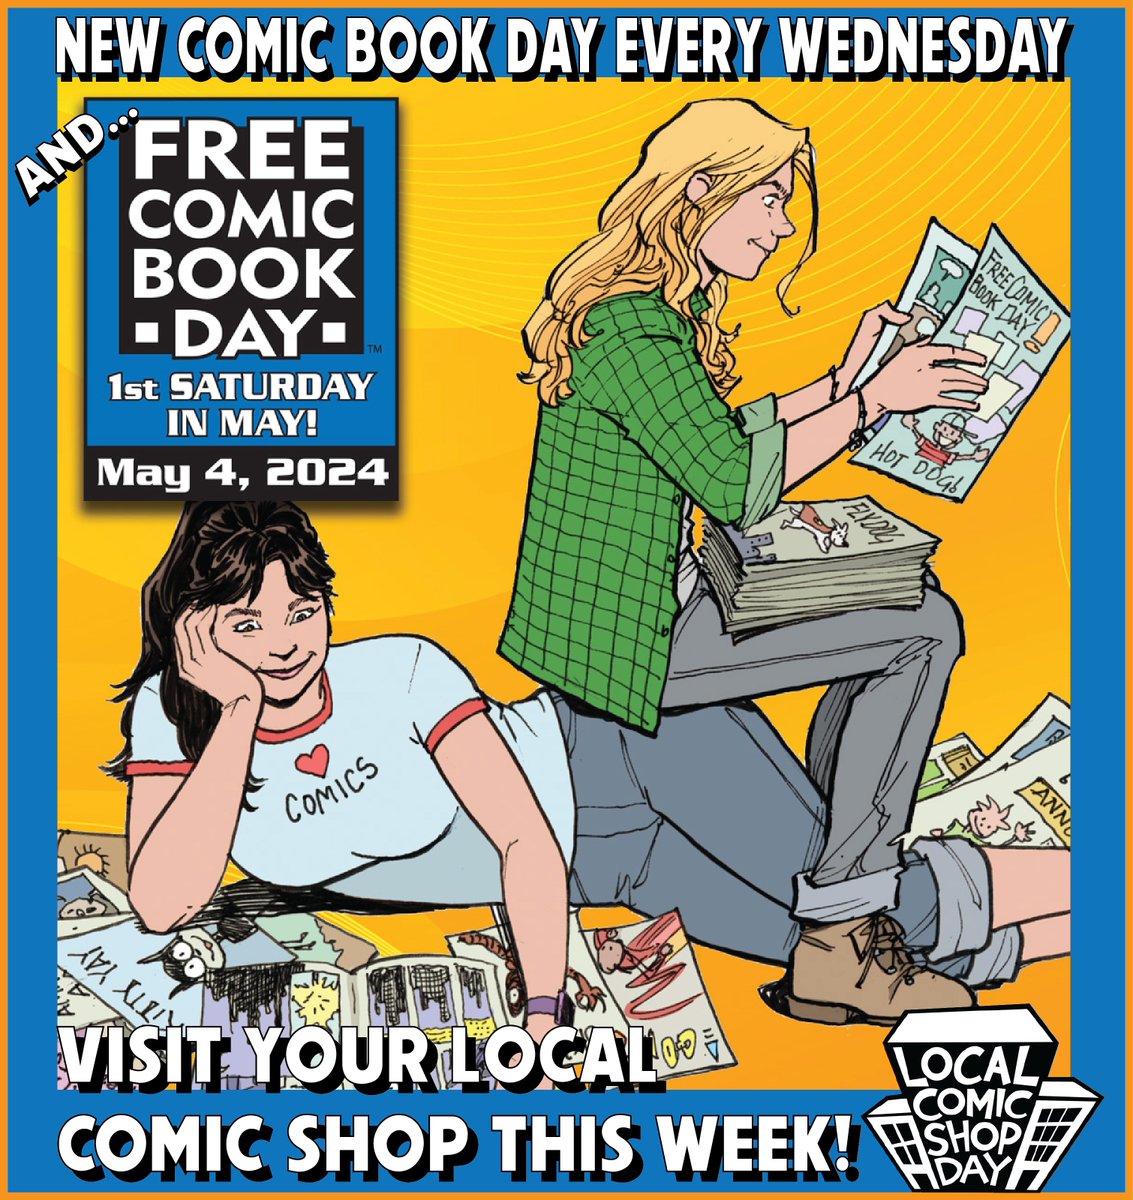 Visit Your Local Comic Shop This Week!
 
New Comic Book Day is Wed May 1!
Free Comic Book Day is Sat May 4! 

New for May 1 via @PREVIEWSworld: 
previewsworld.com/NewReleases 
New from @DCOfficial: 
dccomics.com/comics 

#LCSD #LCBS #NCBD #comics  #shoplocal #buylocal #FCBD